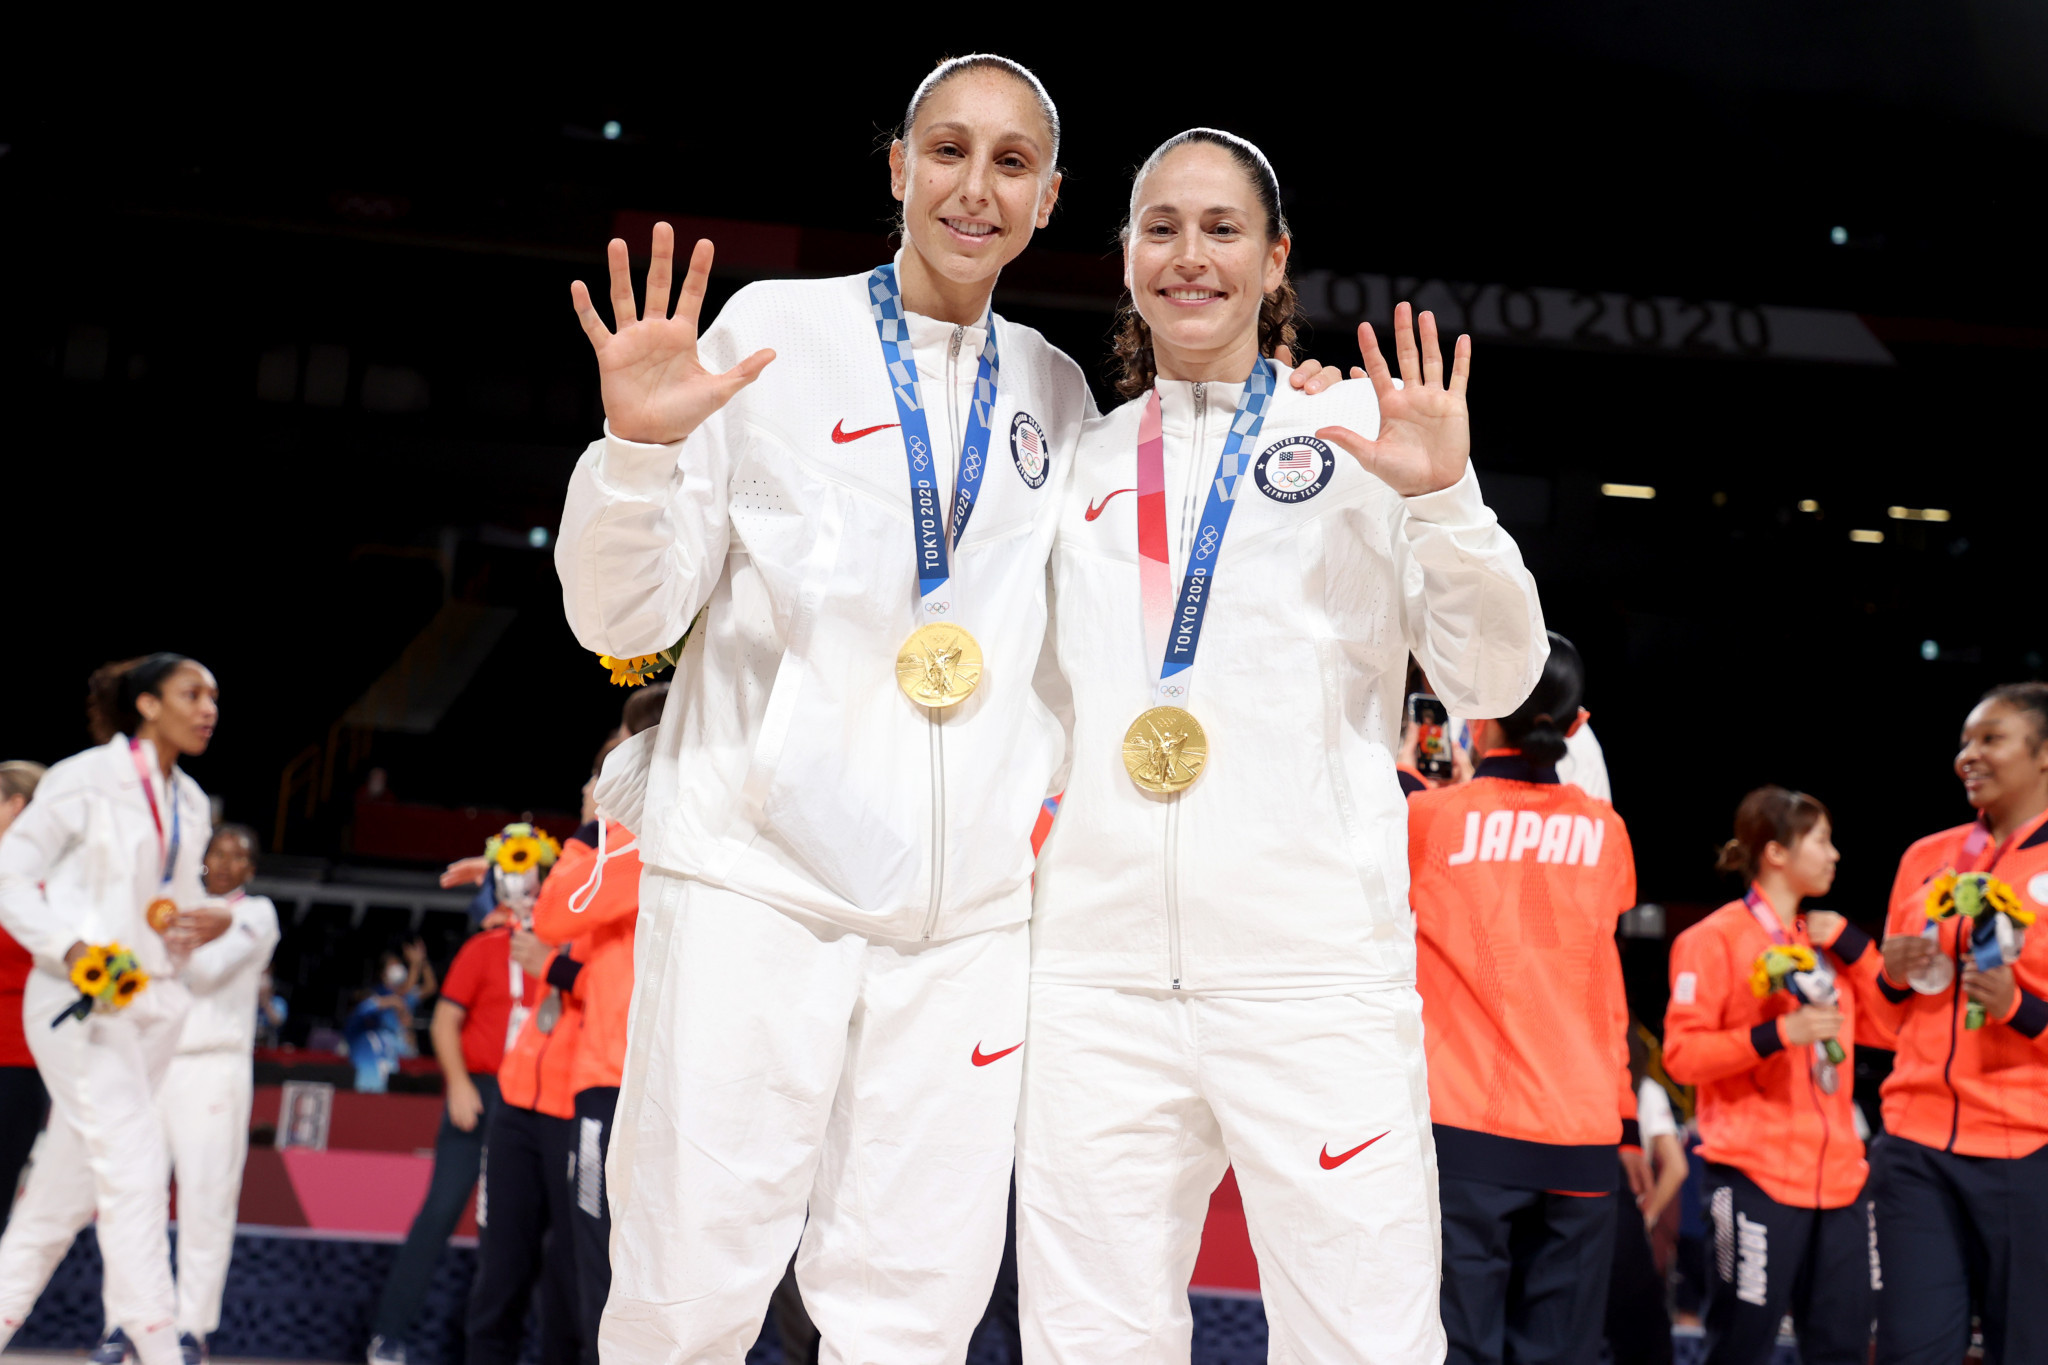 Diana Taurasi, left, and Sue Bird are tied on five Olympic gold medals each, spanning from Athens 2004 to Tokyo 2020 ©Getty Images